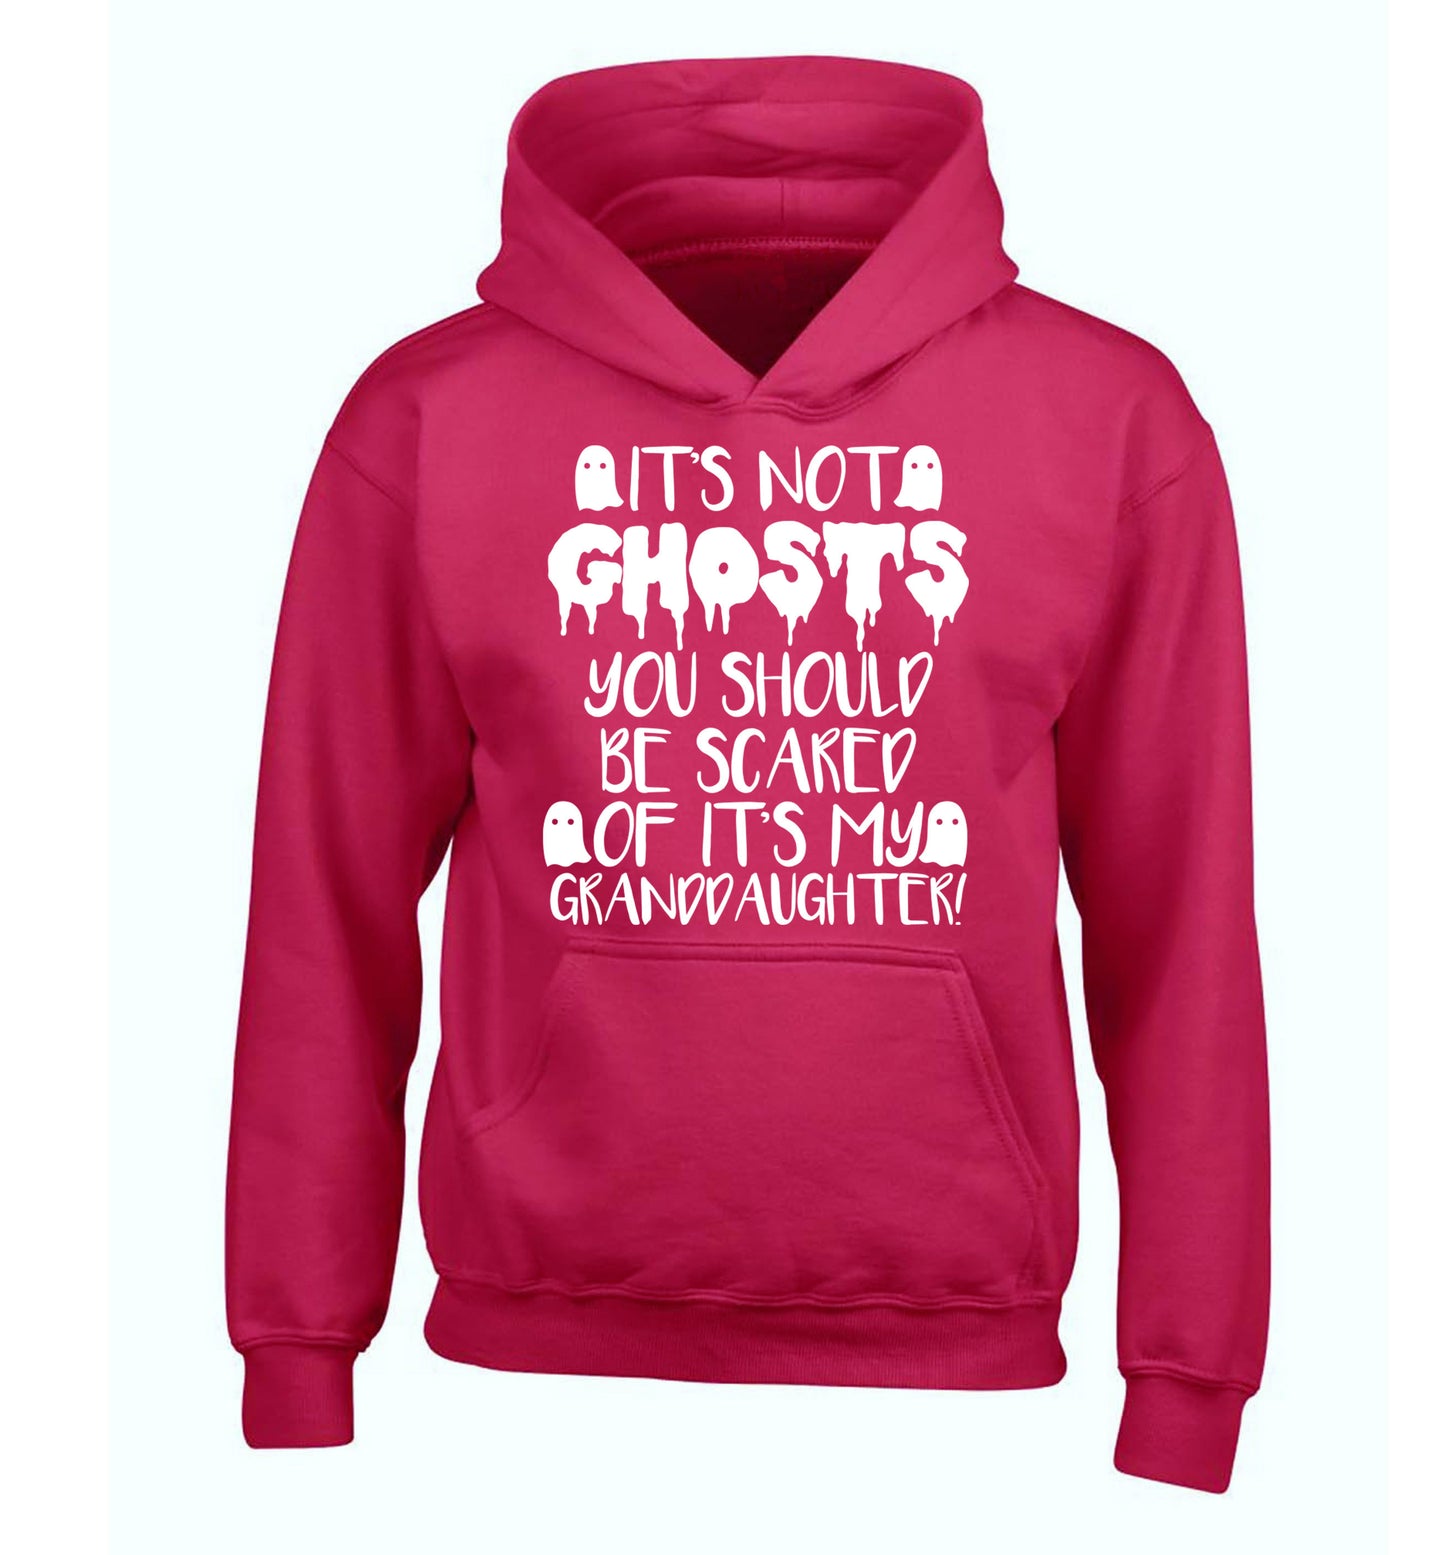 It's not ghosts you should be scared of it's my granddaughter! children's pink hoodie 12-14 Years